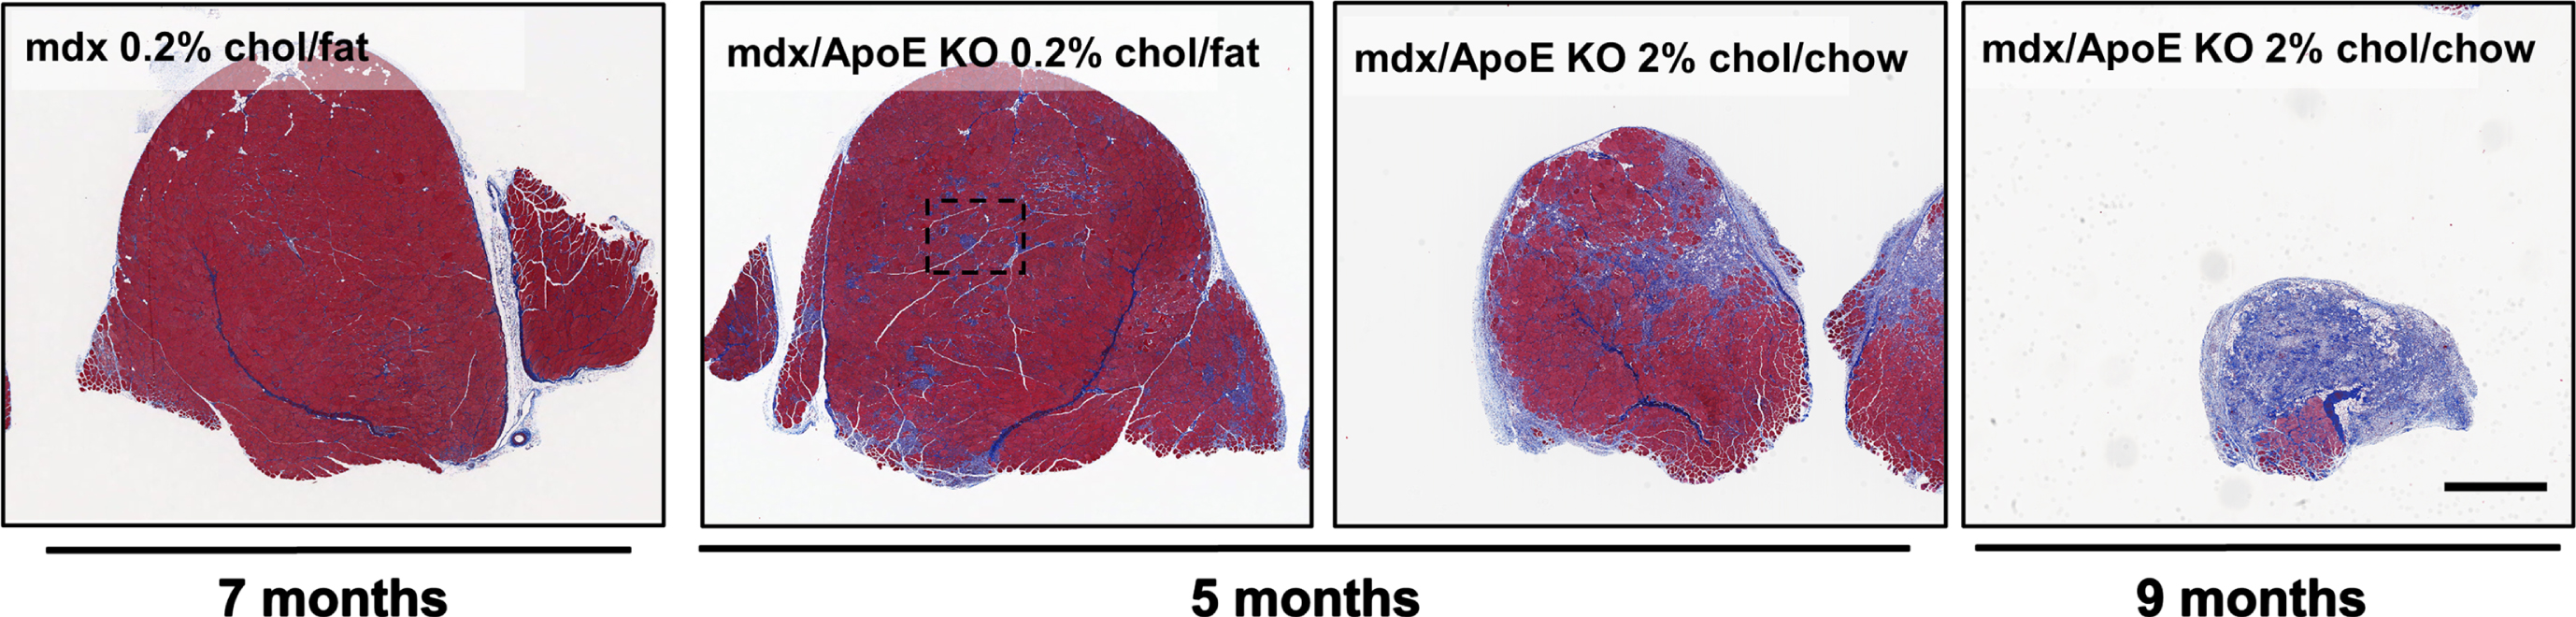 Compared with mdx mice, mdx/ApoE KO mice show evidence of severe wasting, atrophy and fiber-rich infiltration in response to dietary cholesterol supplementation. Mdx mice on an atherogenic 0.2% cholesterol, fat-based diet at 7mo of age show less muscle fibrosis and fibrofatty infiltrates than 5mo mdx/ApoE KO mice on the same diet, whereas cholesterol supplementation with a 2% cholesterol, chow-based diet further exacerbates muscle wasting at both 5 and 9mo of age, the latter resulting in humane termination due to ambulatory dysfunction. Scale bar 1 mm, all images were captured at the same magnification [32, 68].